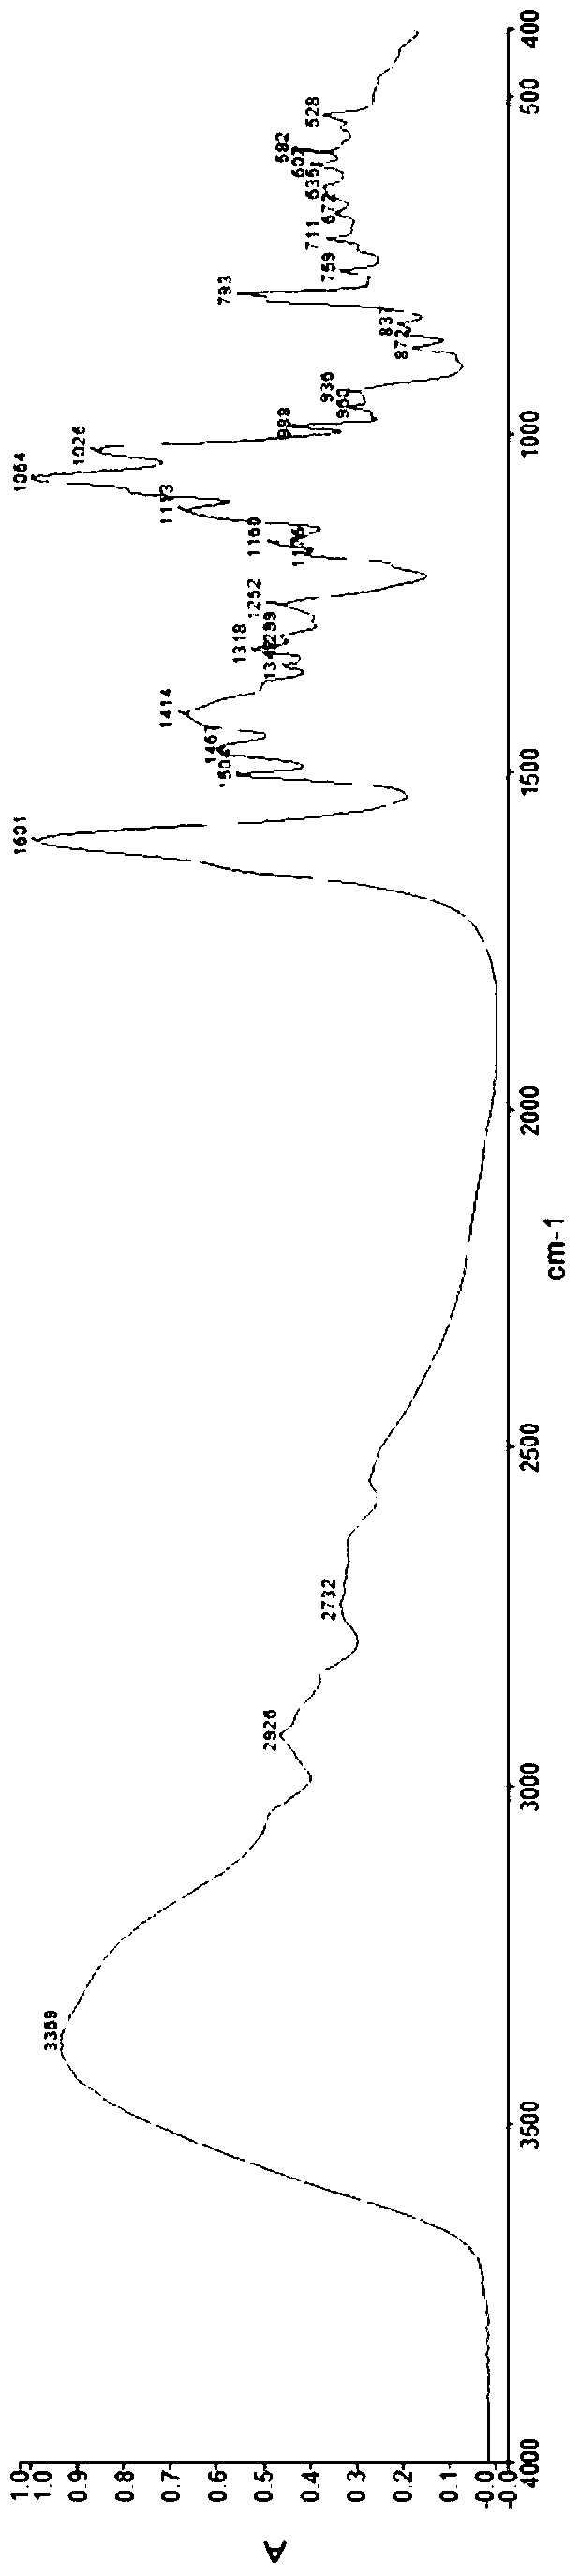 Morphine derivative crystal form ii and its preparation method and use